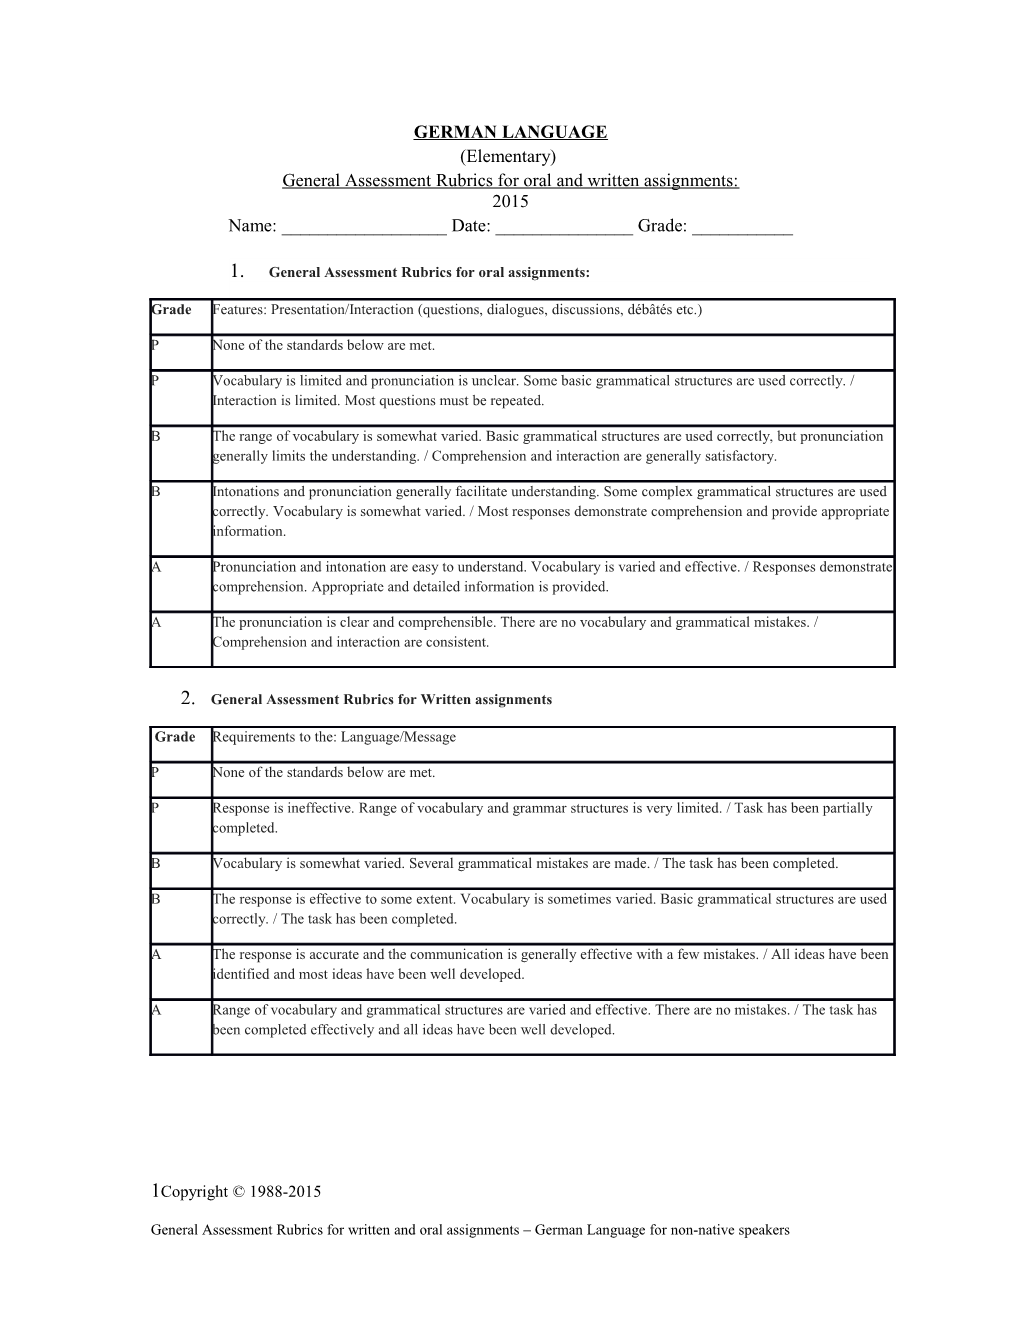 General Assessment Rubrics for Oral and Written Assignments